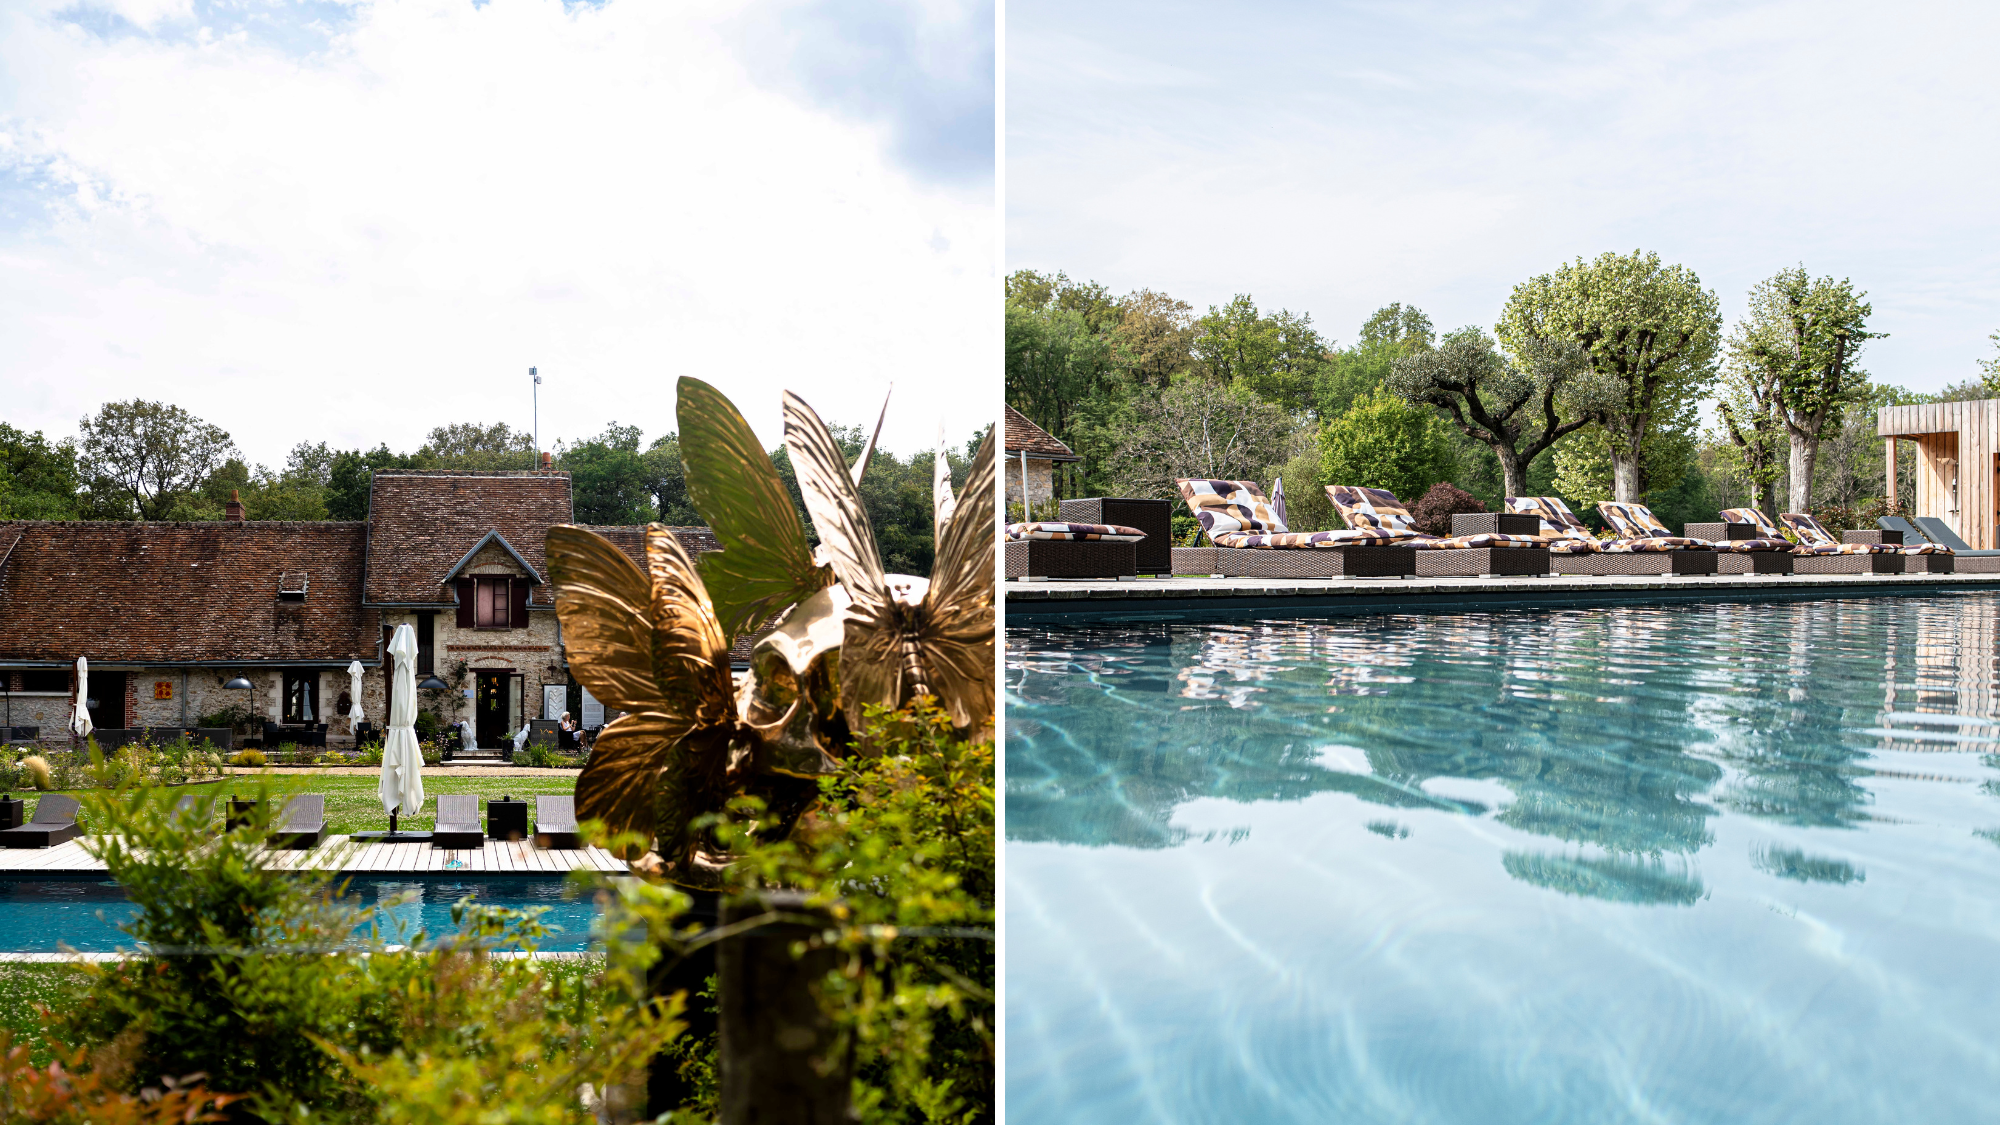 A composite image: left shows the pool and main lodge at Loire Valley Lodges, the right shows a close up of the pool and loungers